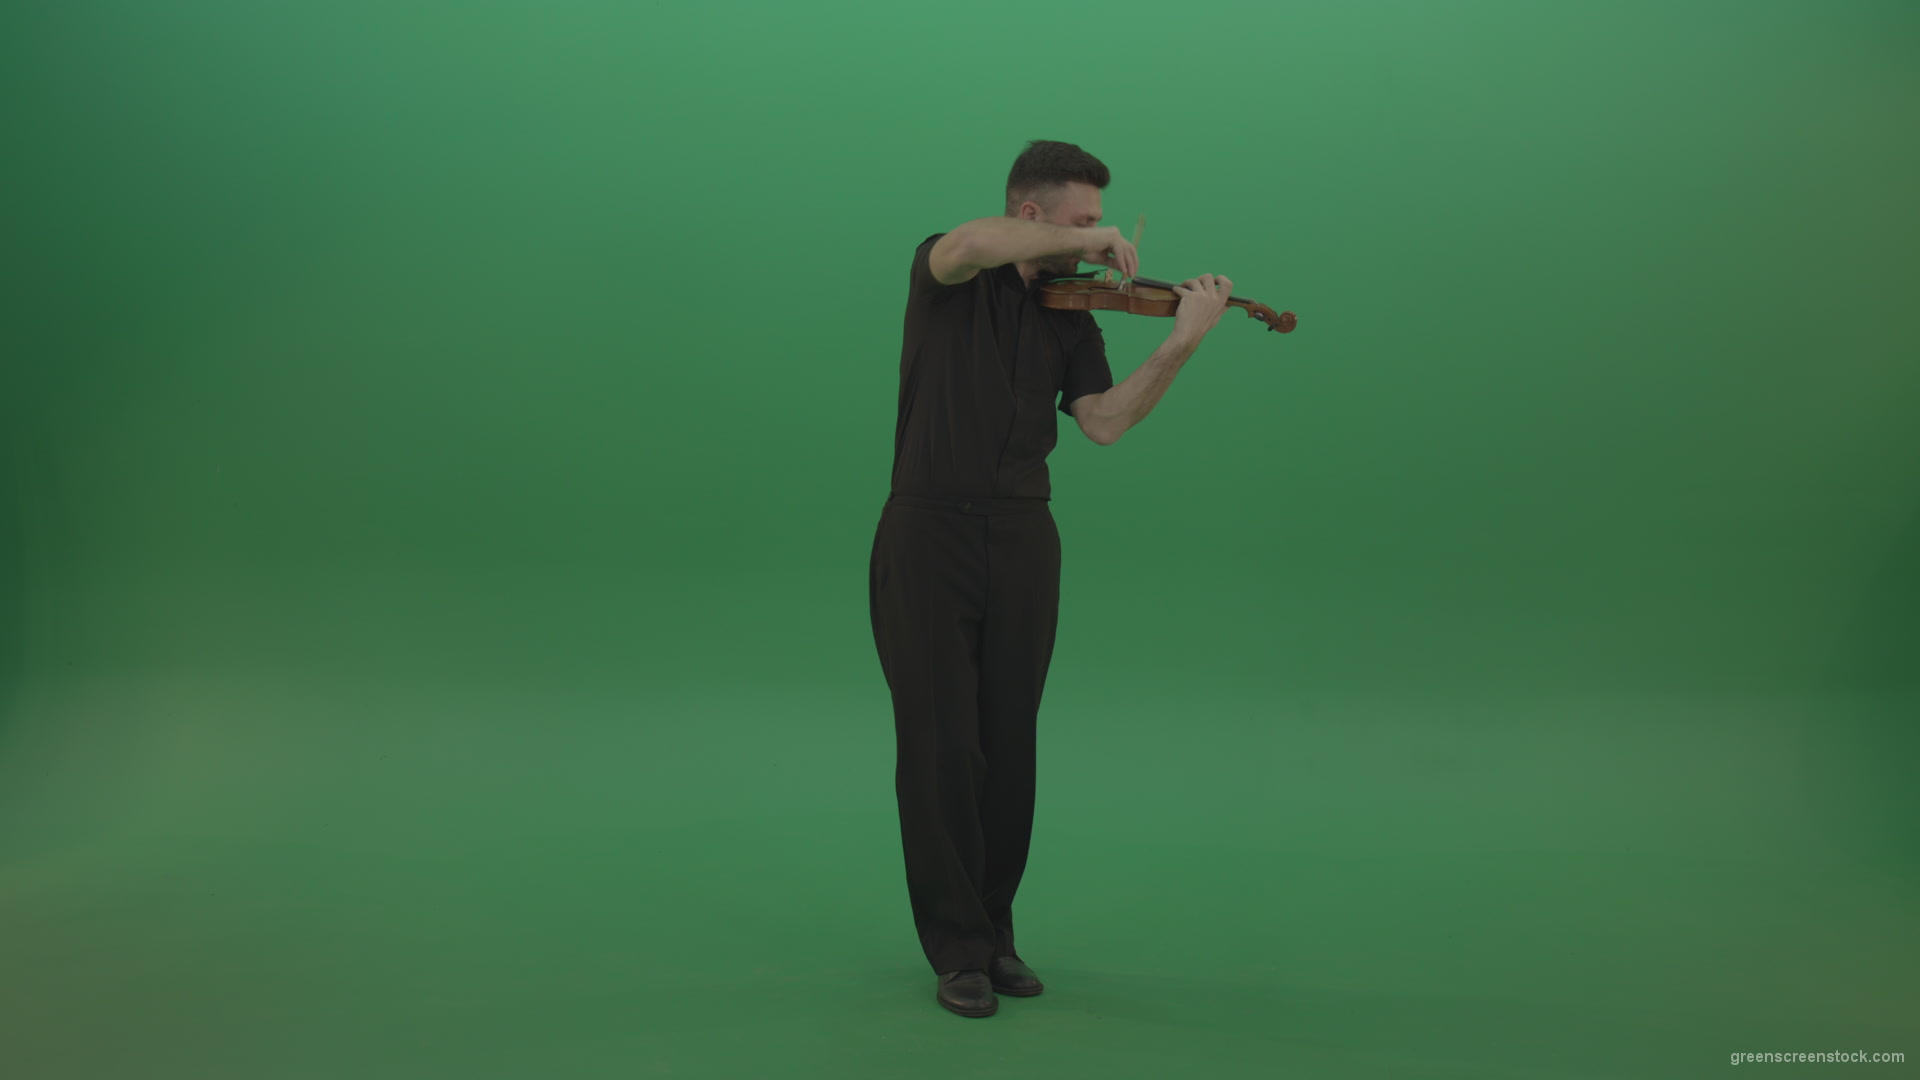 Full-size-view-virtuoso-Man-in-black-costume-play-violin-fiddle-strings-music-instument-on-green-screen_006 Green Screen Stock